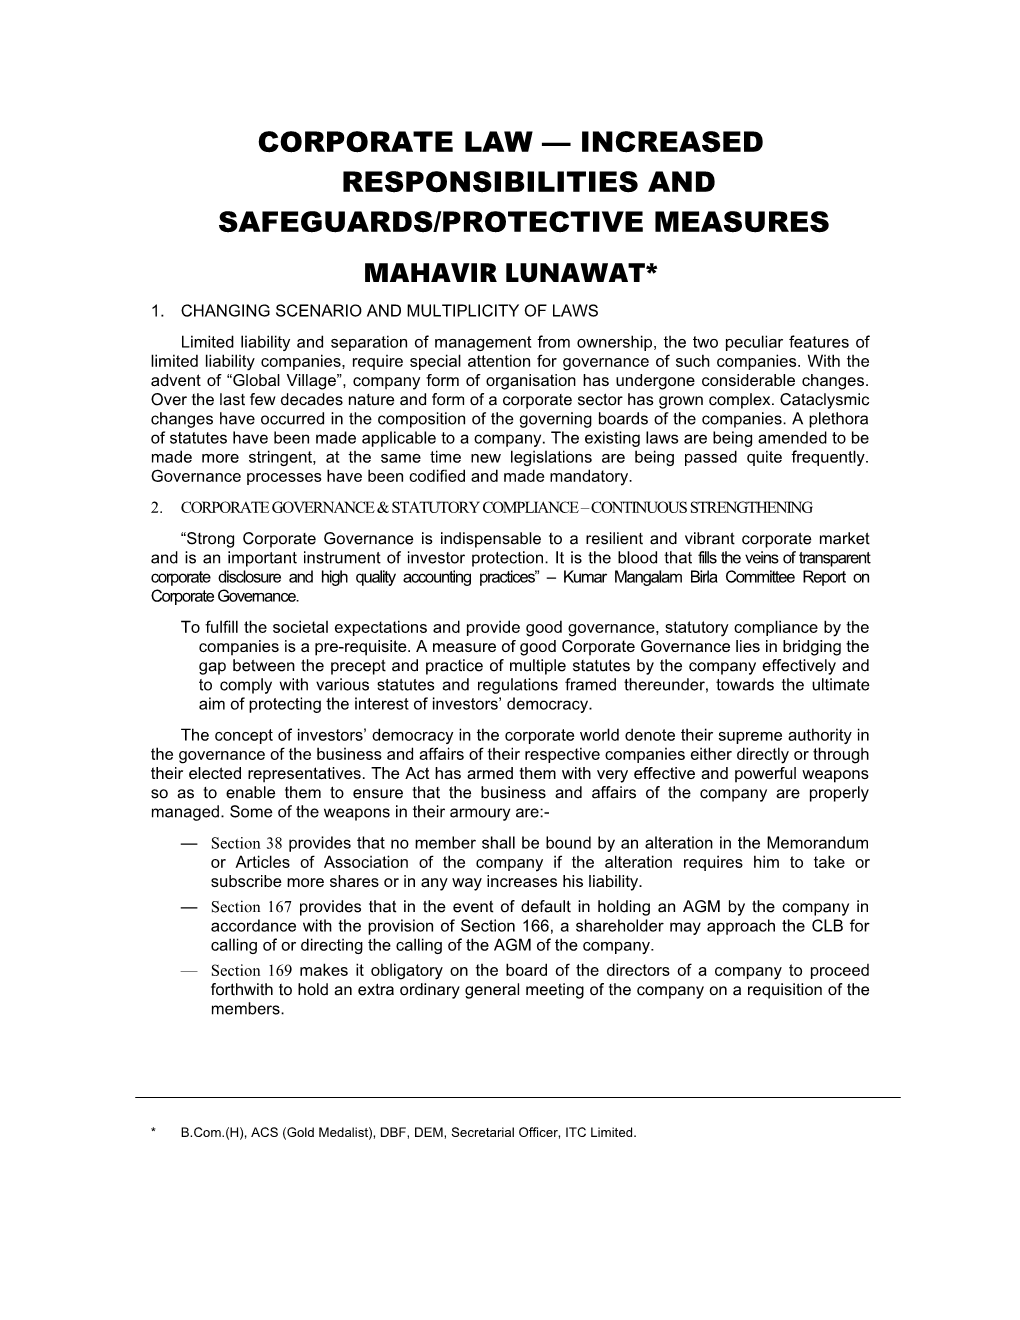 Corporate Law Increased Responsibilities and Safeguards/Protective Measures